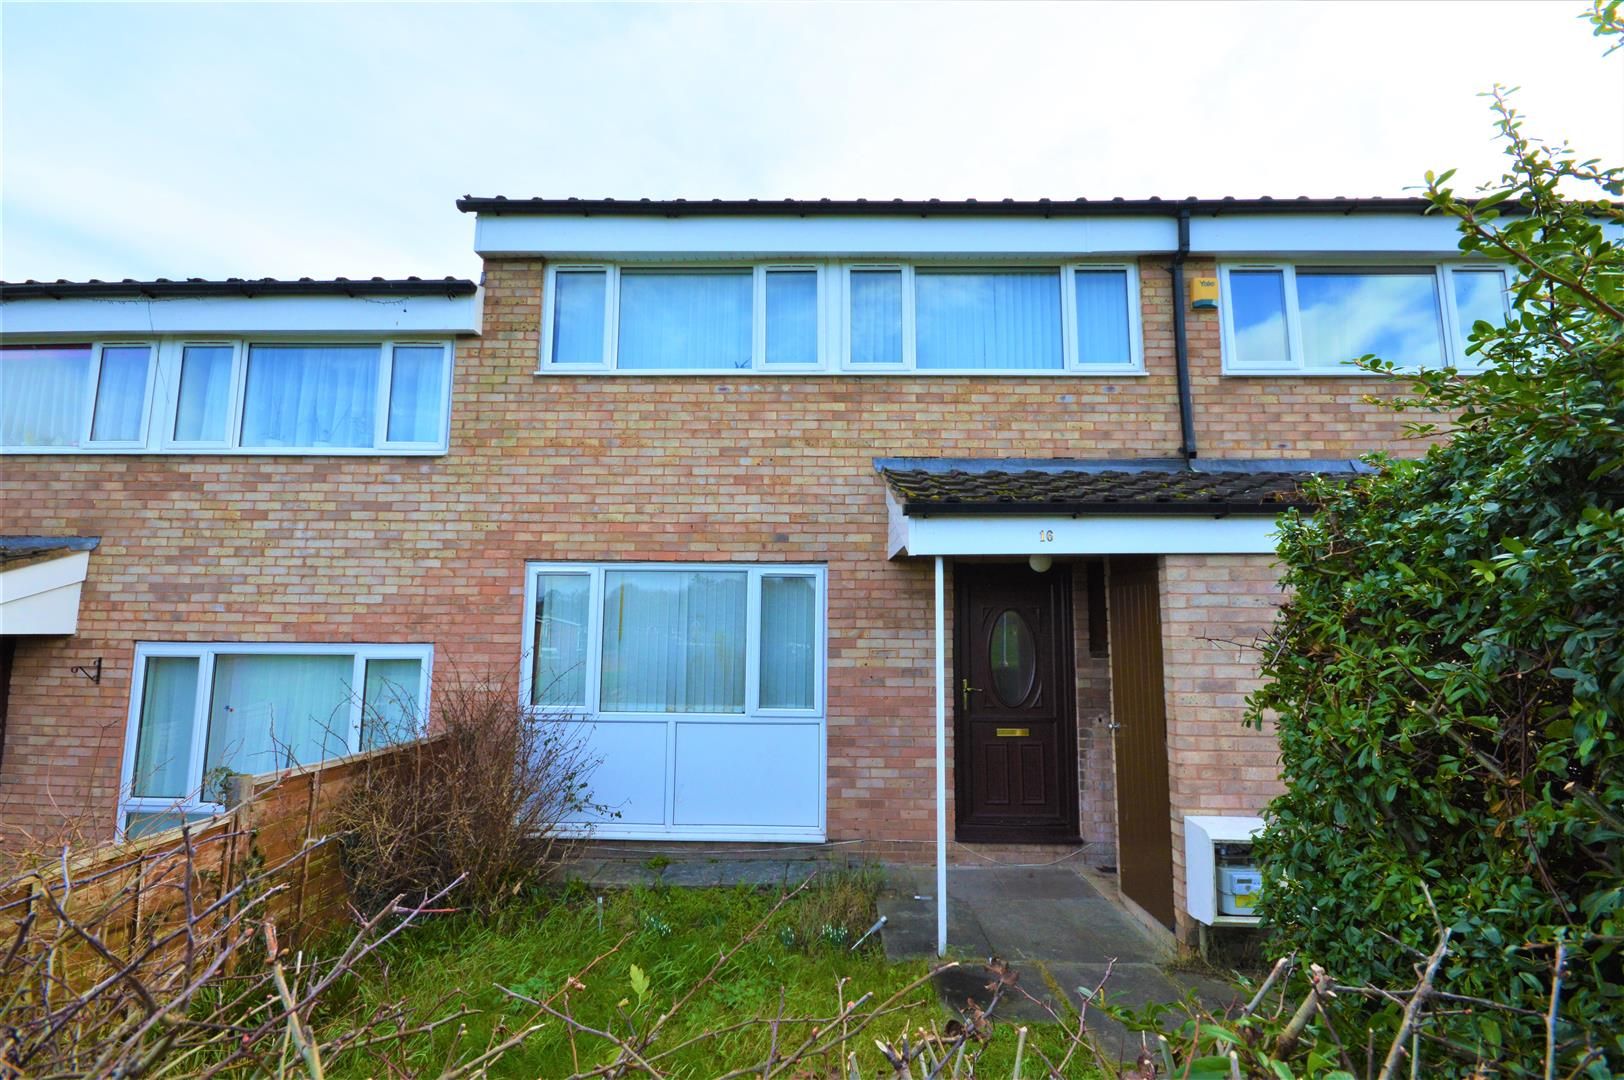 3 bed terraced for sale in Hereford - Property Image 1